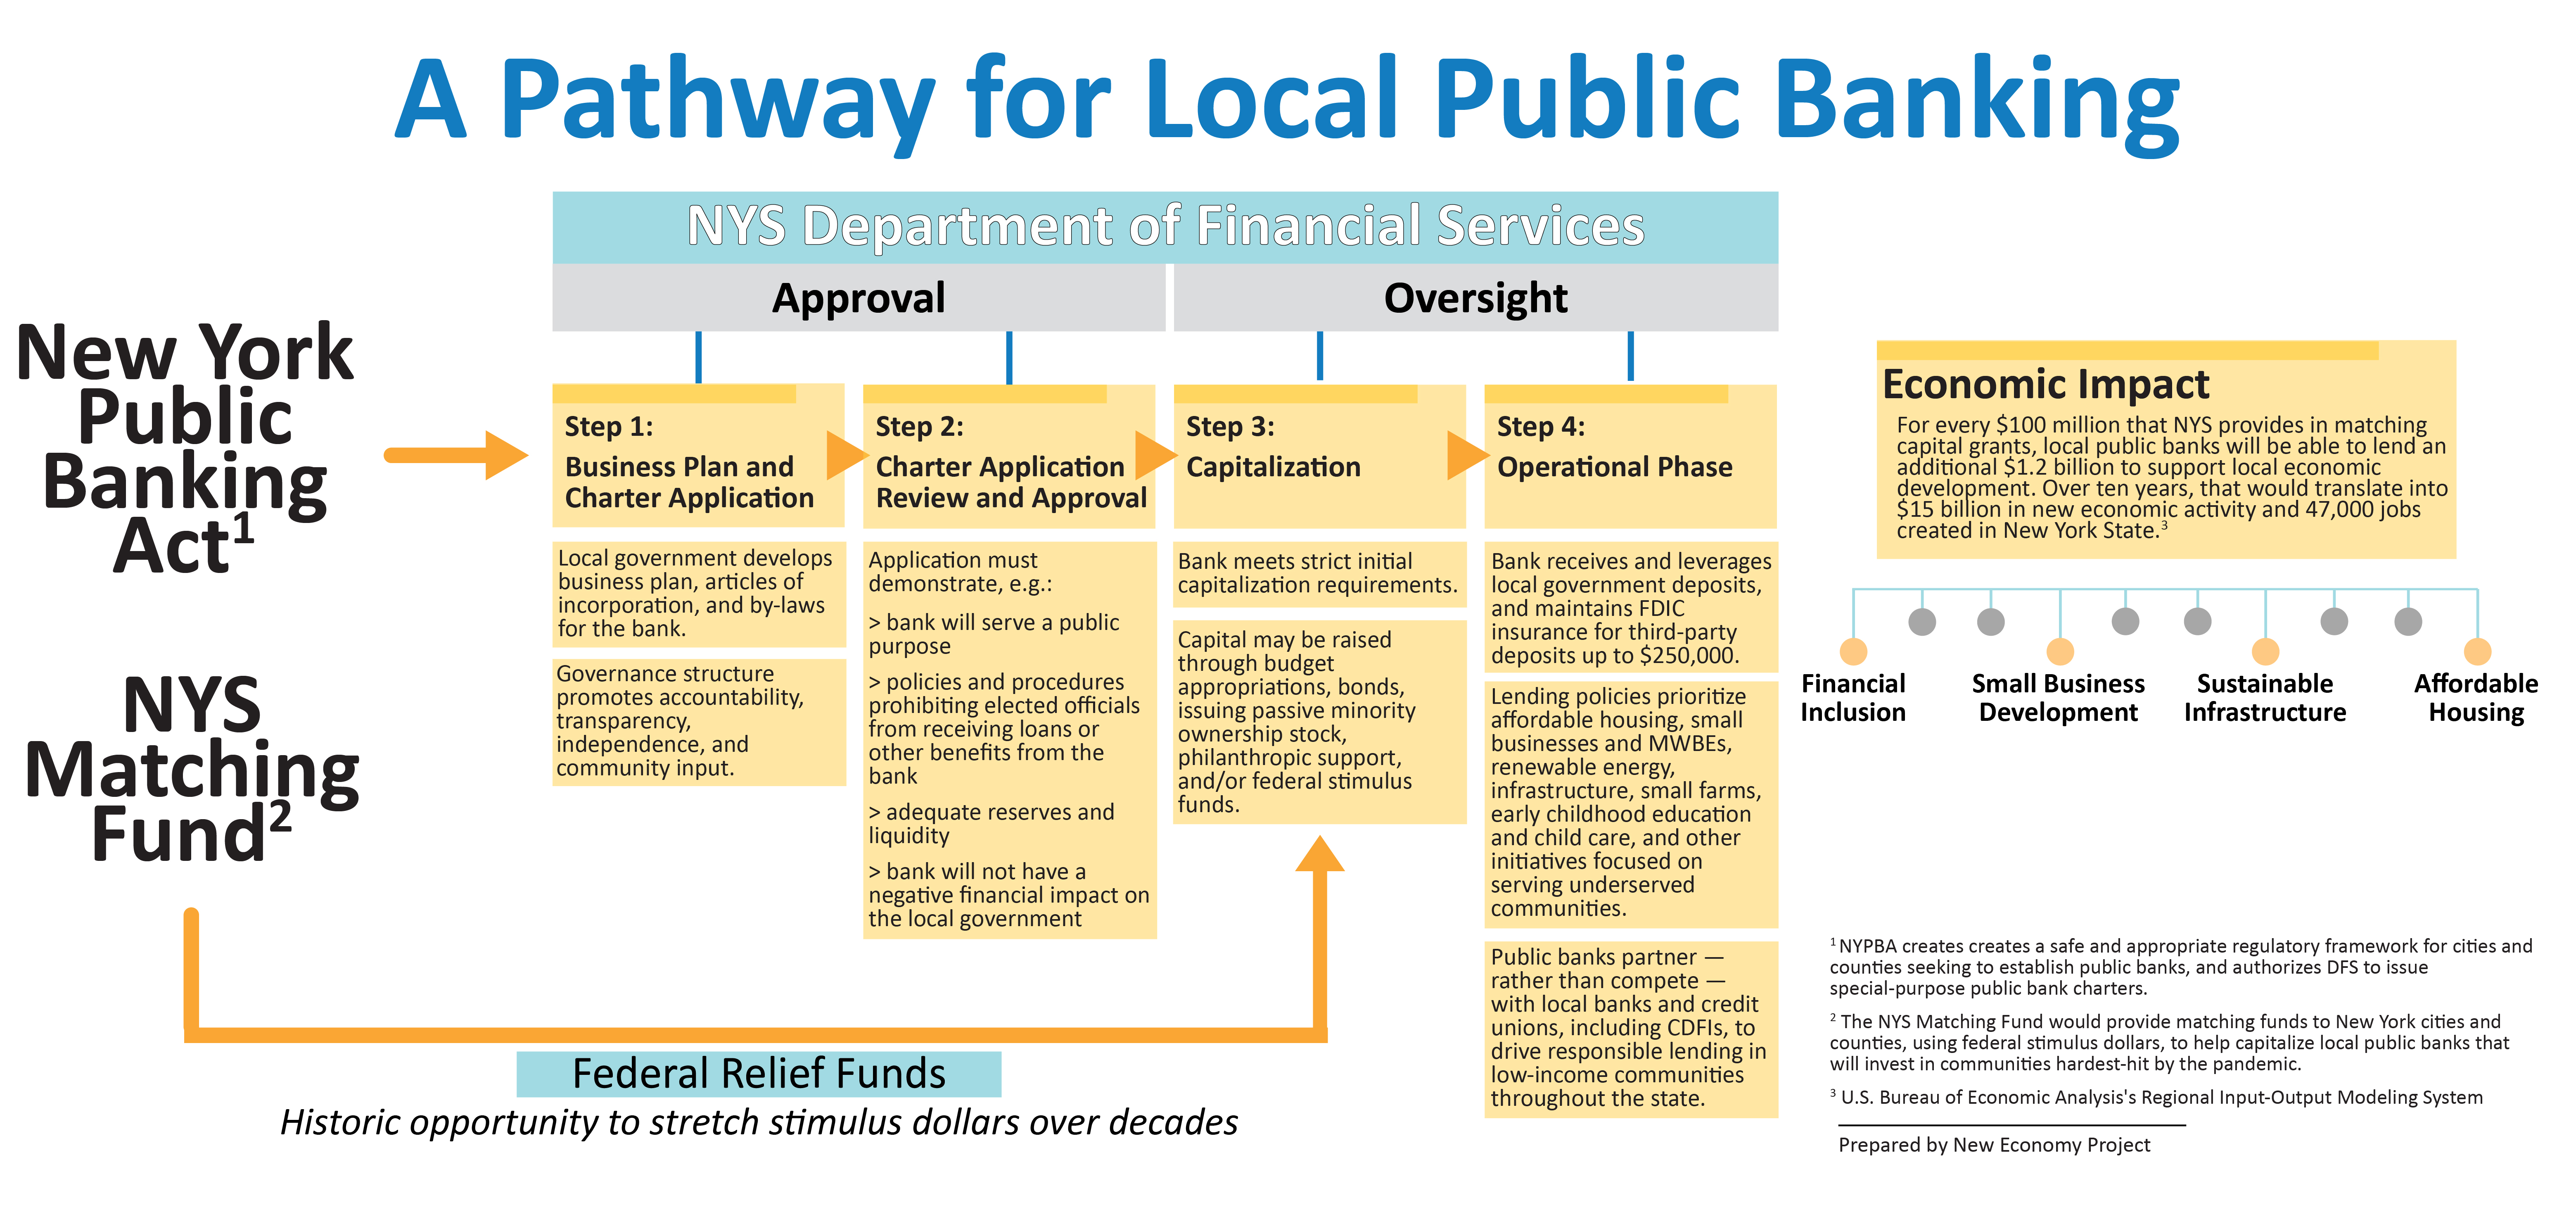 A Pathway for Local Public Banking